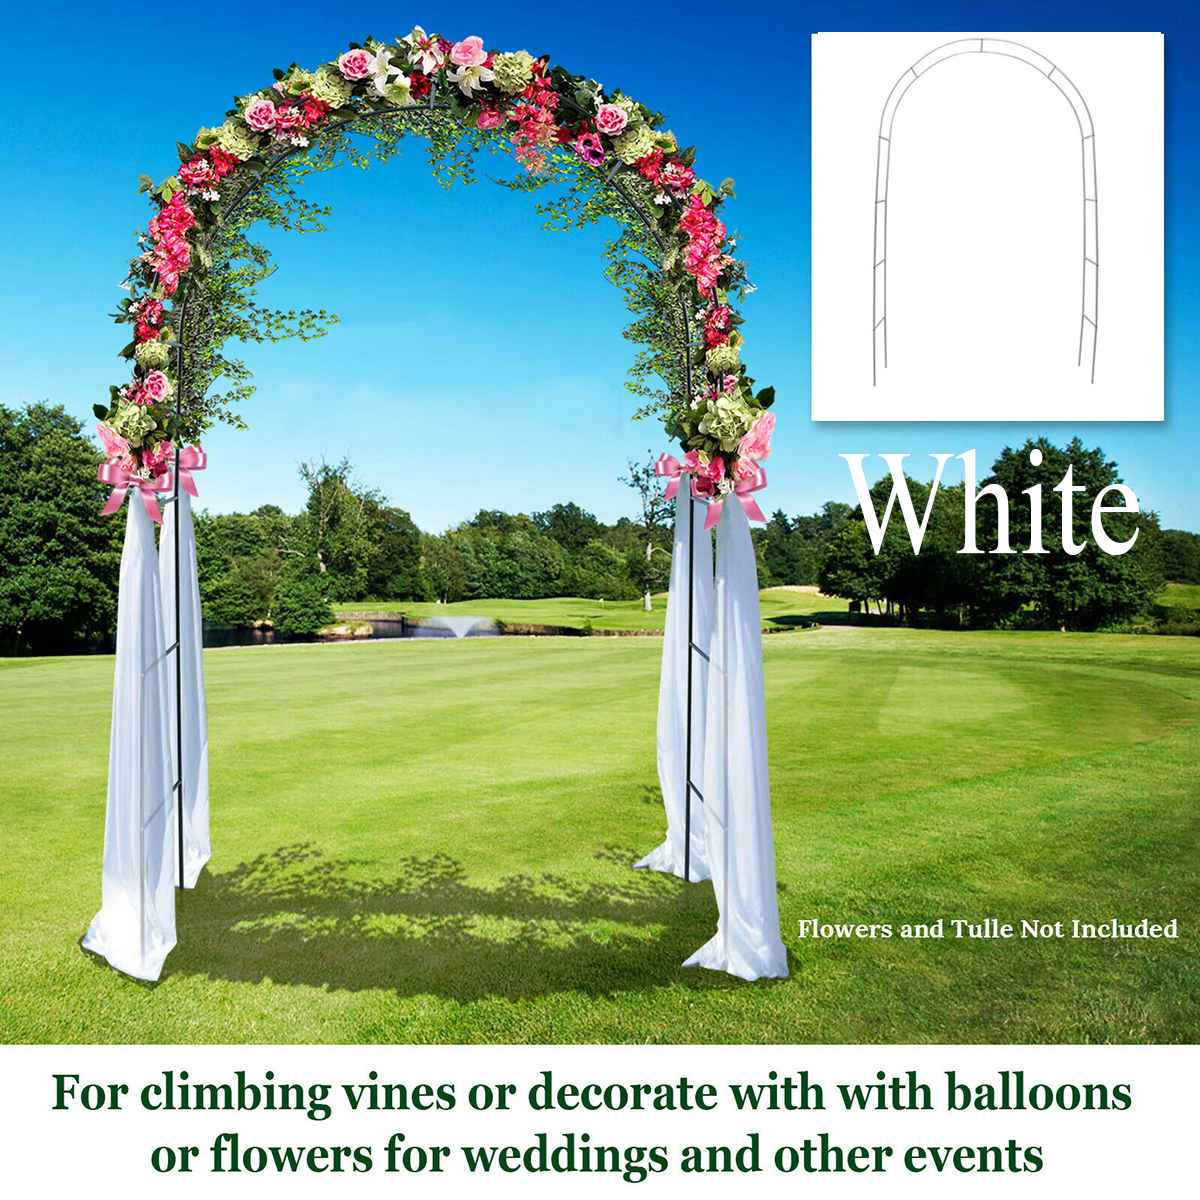 2 NEW 90" WHITE METAL ARCH Wedding Party Bridal Prom Garden Floral Decoration 